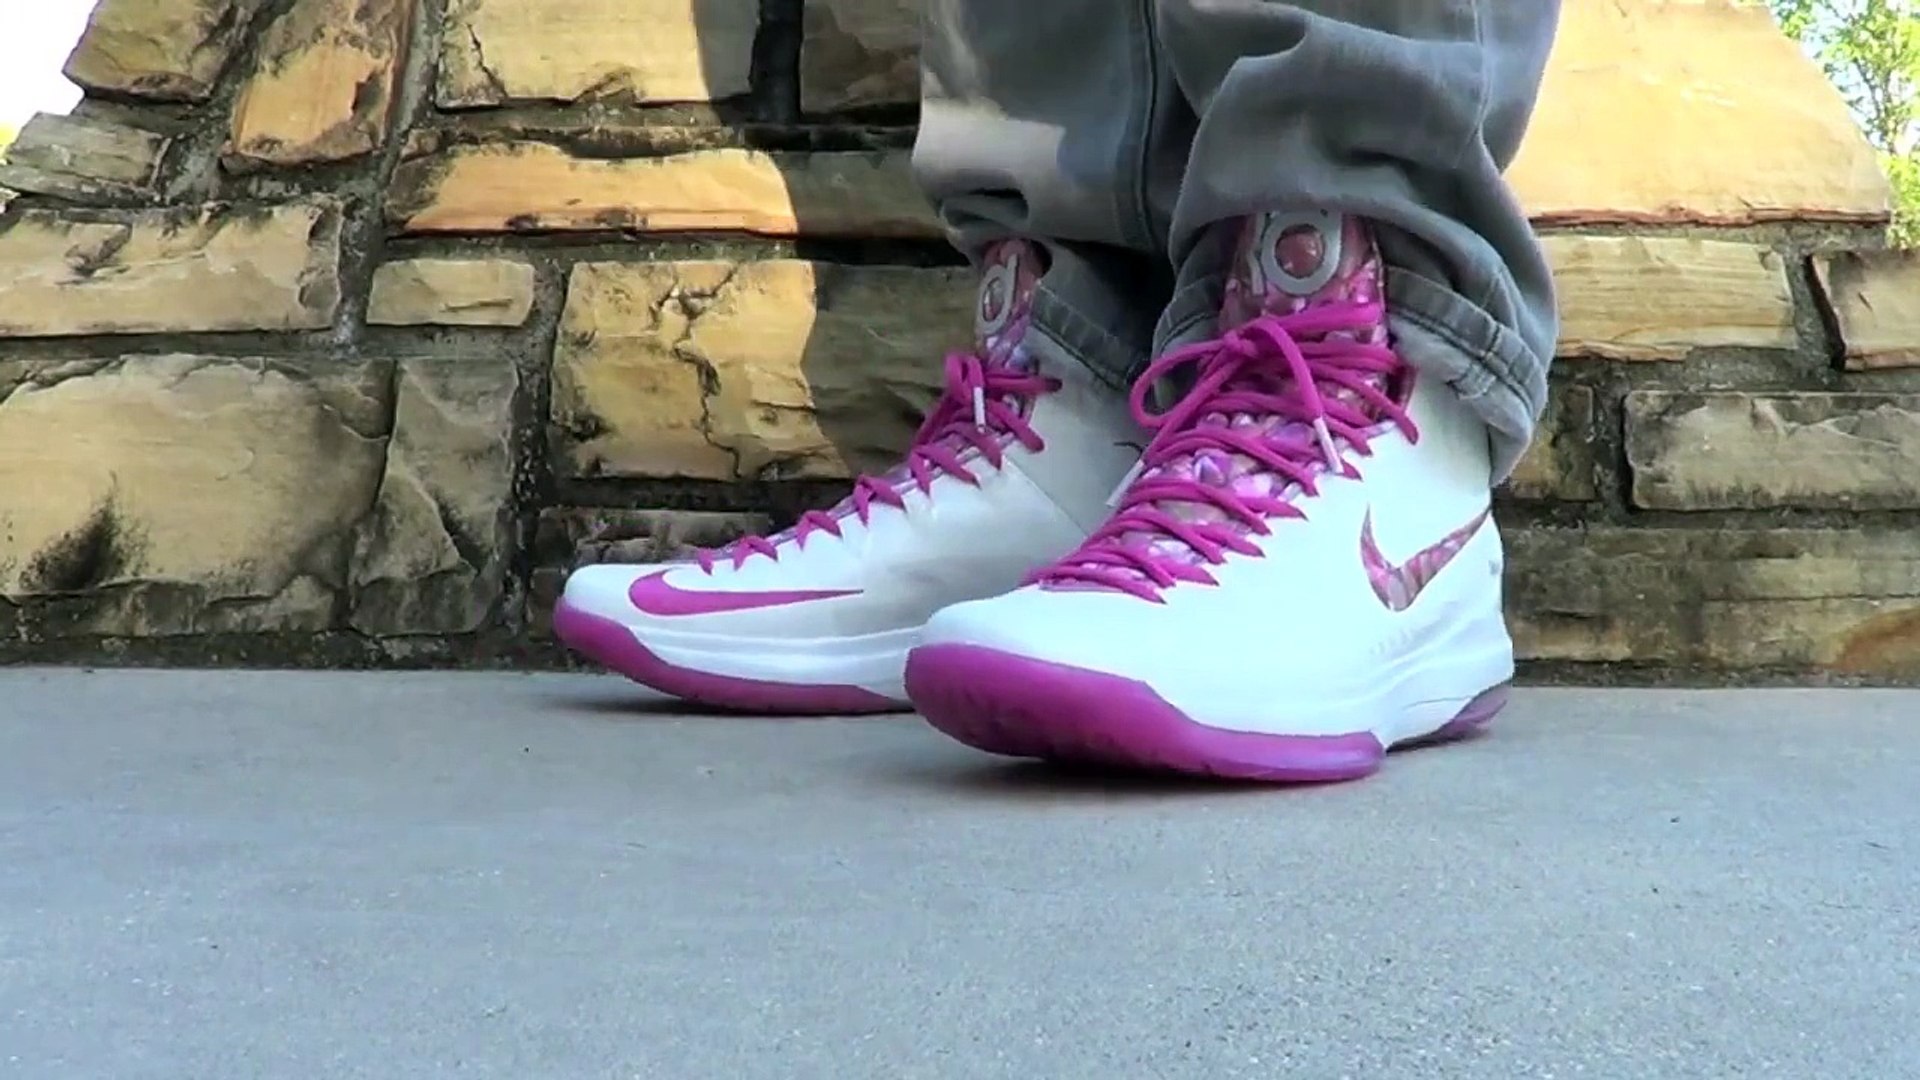 aunt pearl kd 5